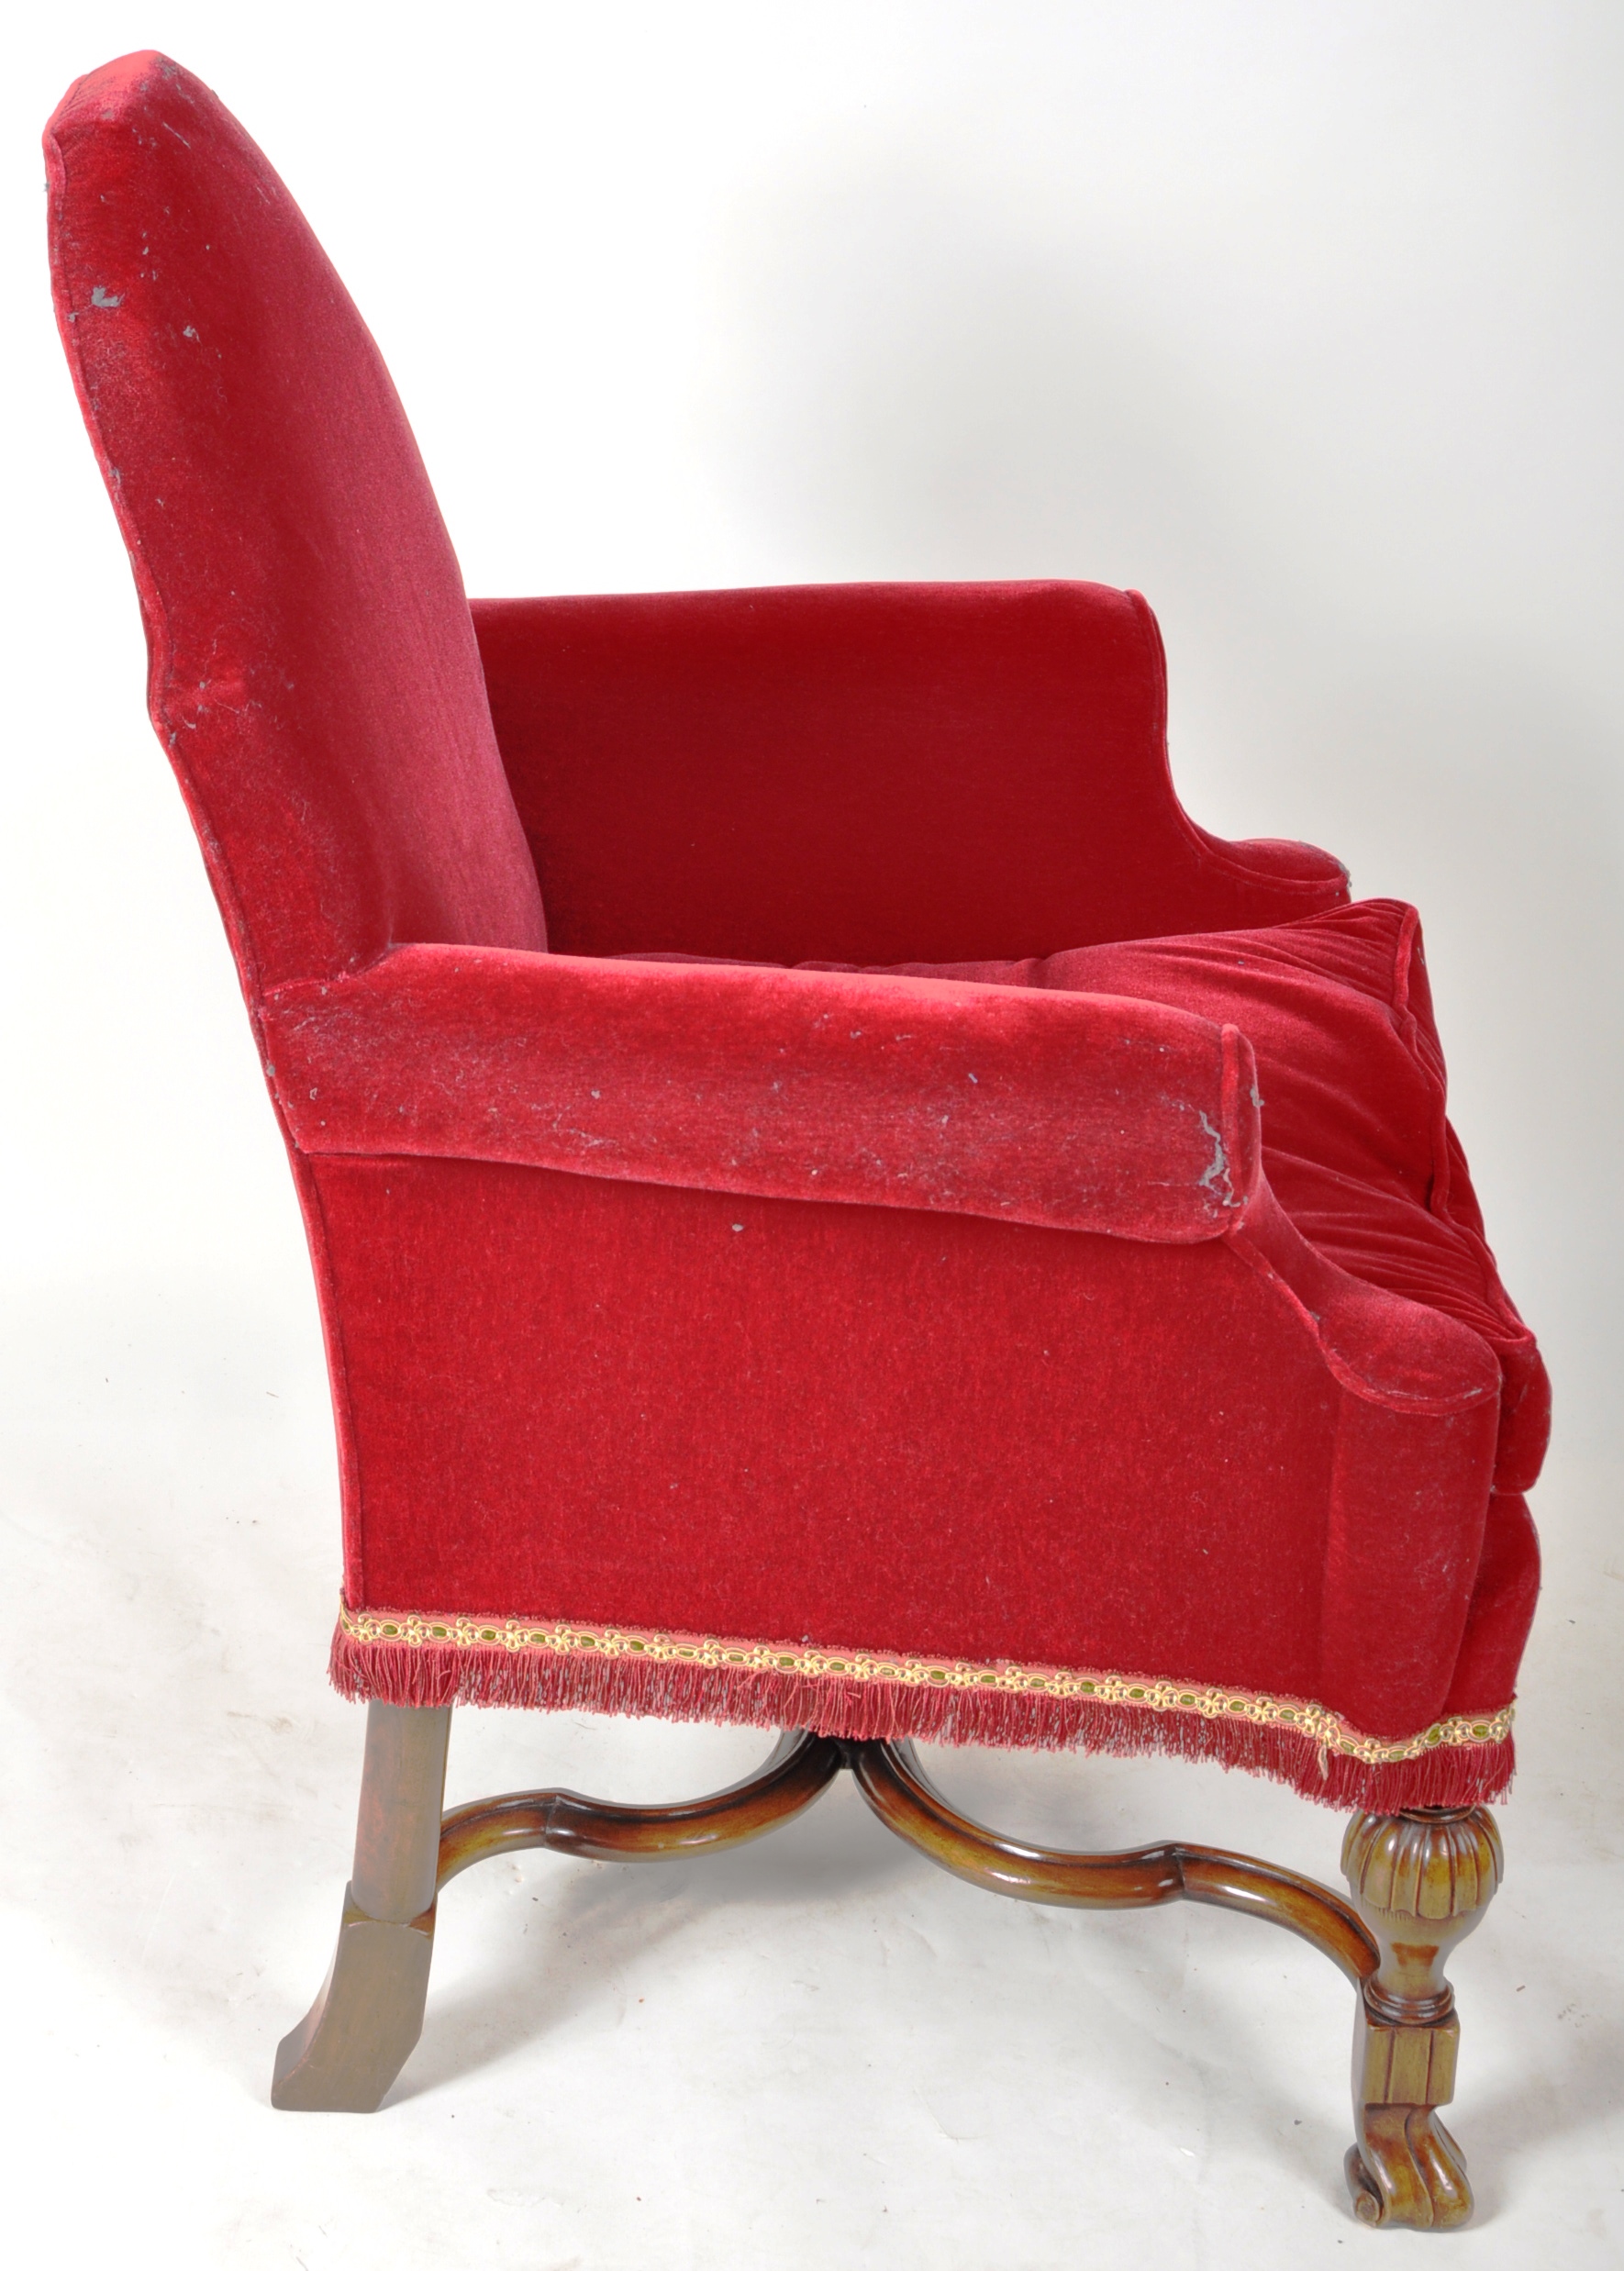 20TH CENTURY QUEEN ANNE REVIVAL FIRESIDE ARMCHAIR - Image 7 of 8